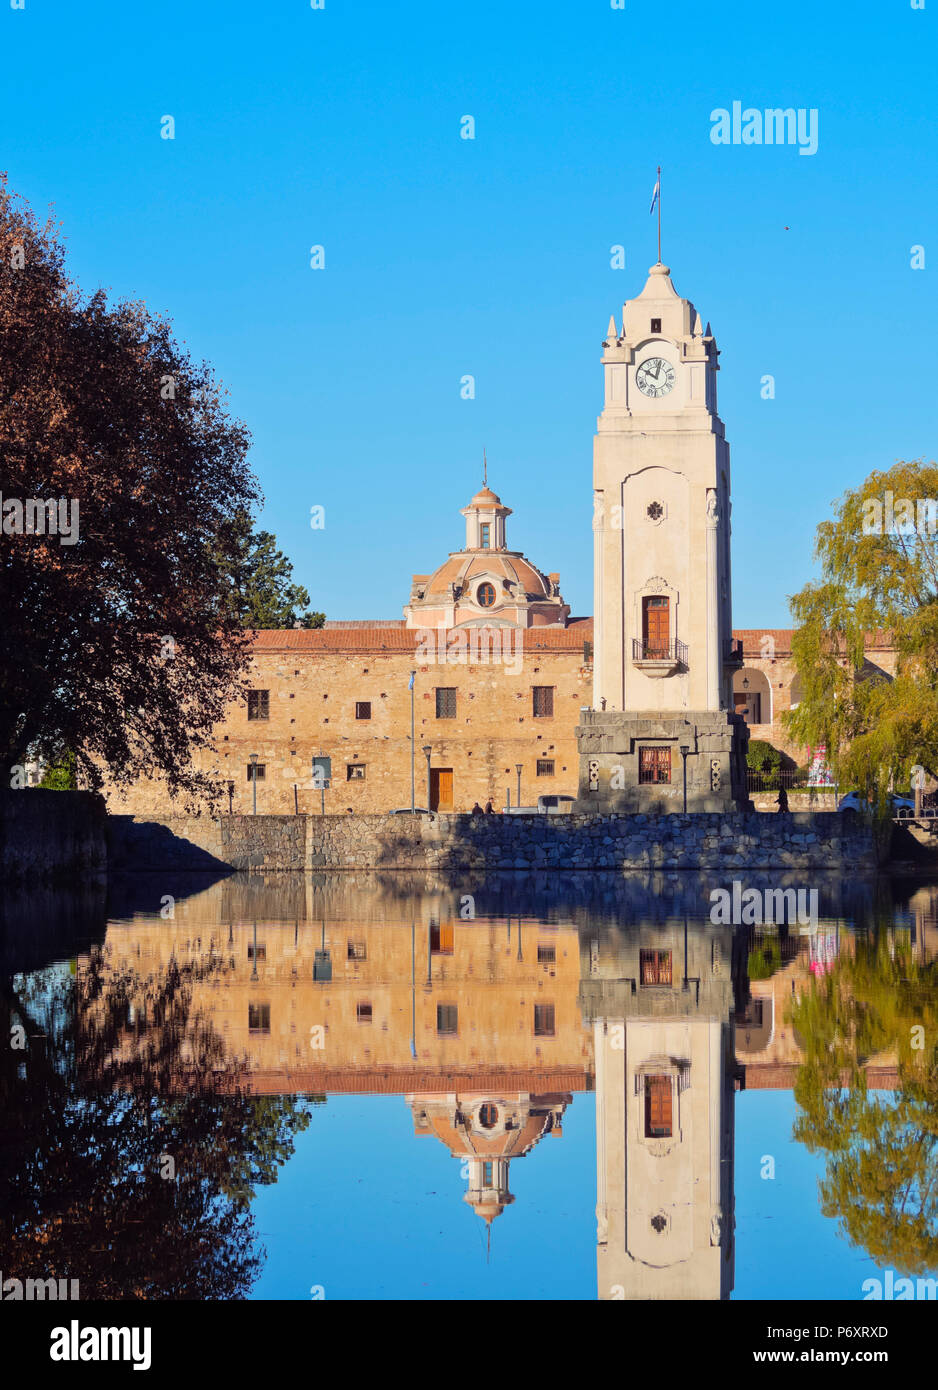 Argentina, Cordoba Province, Alta Gracia, View of El Tajamar Water Reservoir build by Jesuits, the Clock Tower and the Jesuit Estancia. Stock Photo